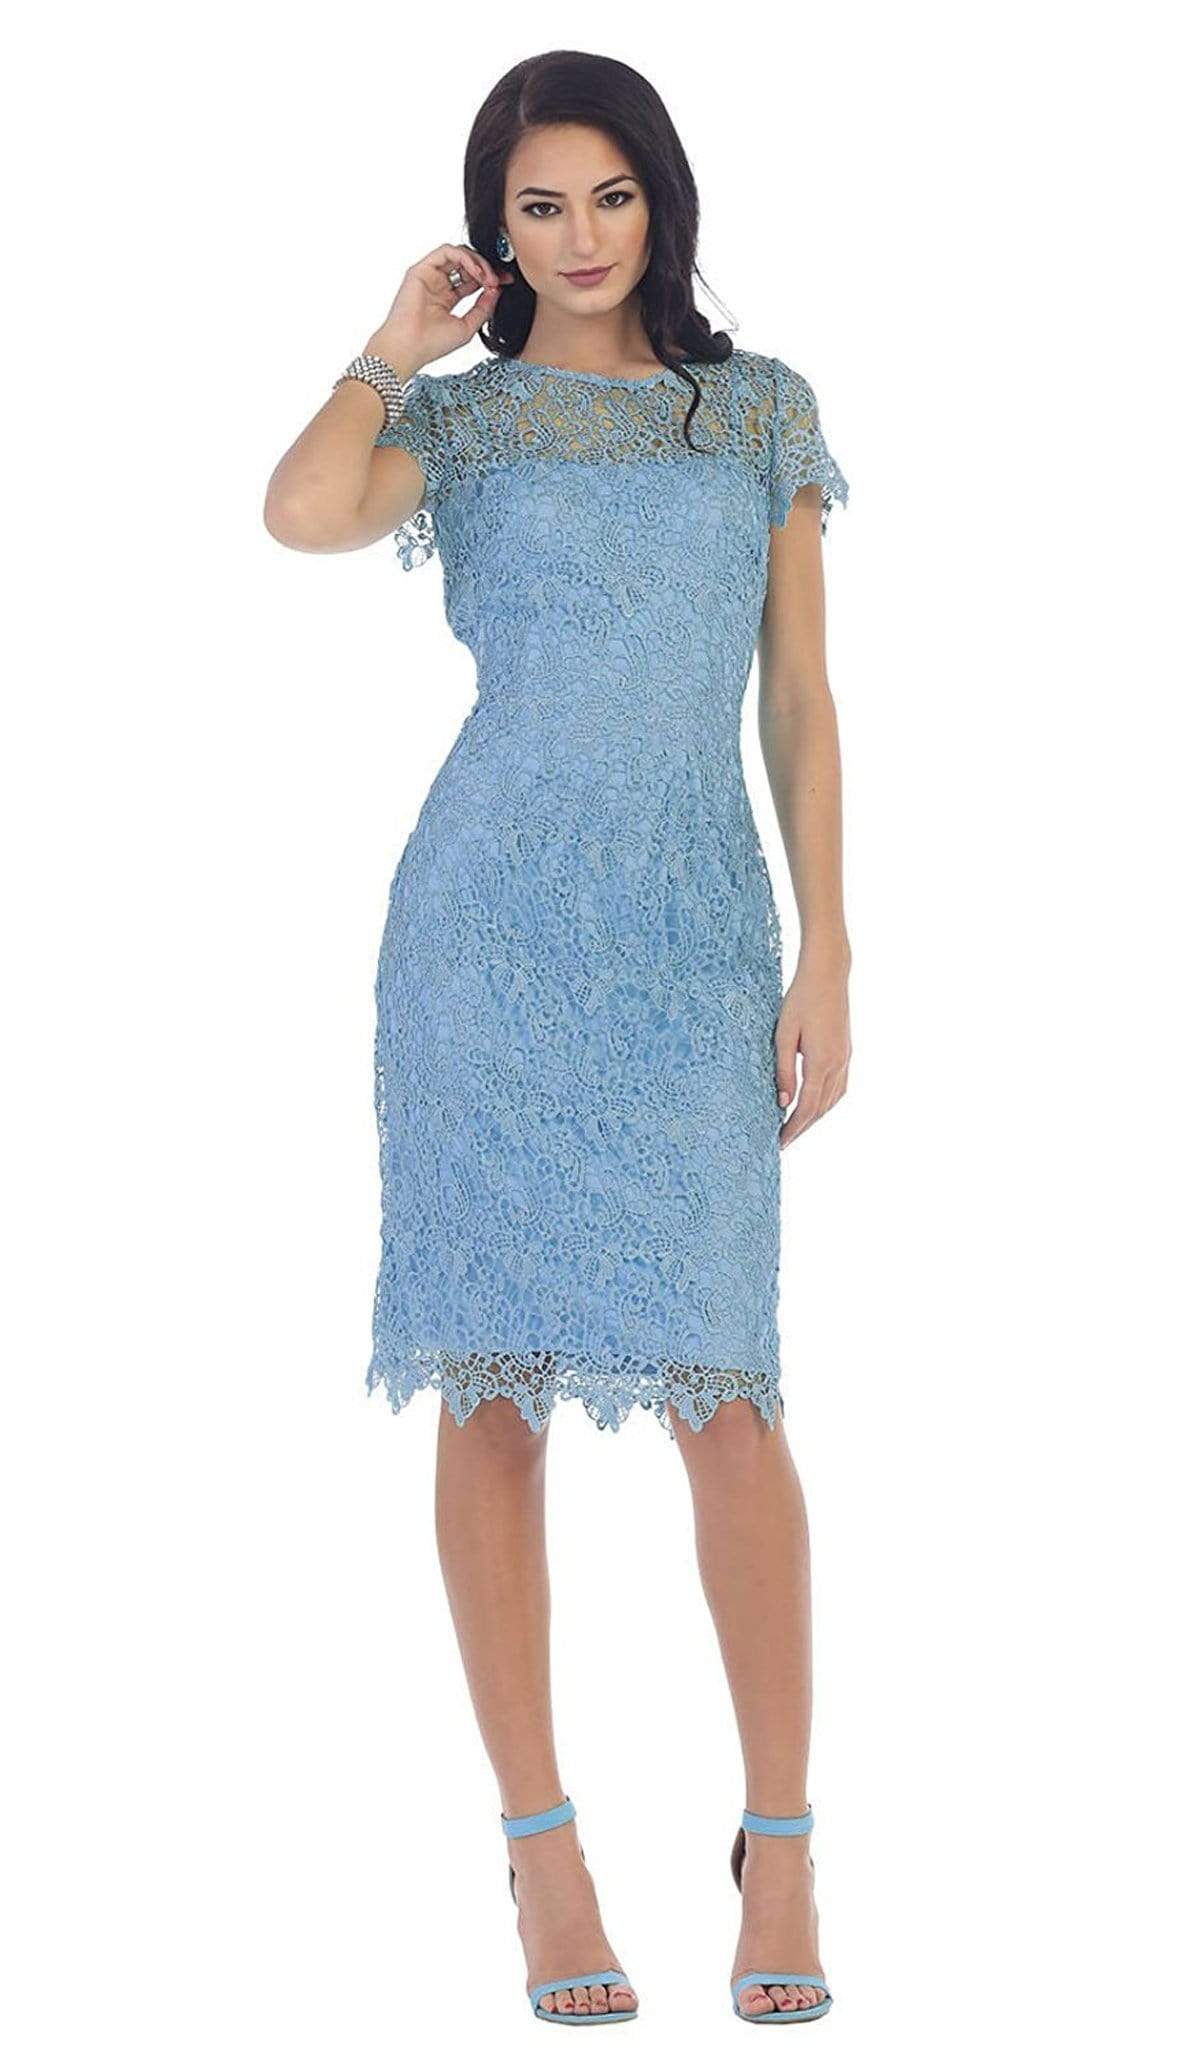 May Queen - Short Sleeve Illusion Lace Sheath Formal Dress Special Occasion Dress M / Periwinkle